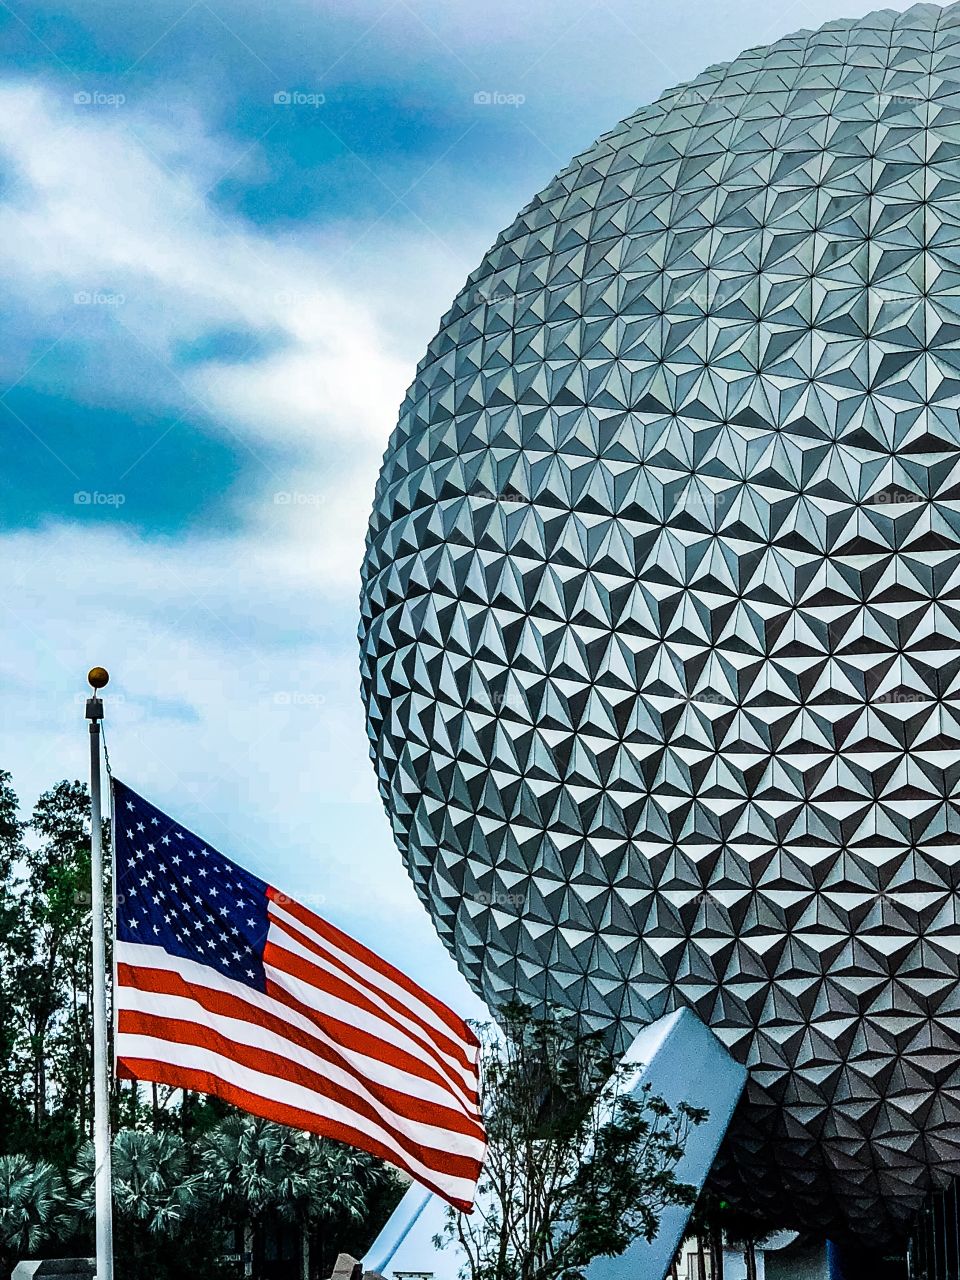 US Flag in front of EPCOT